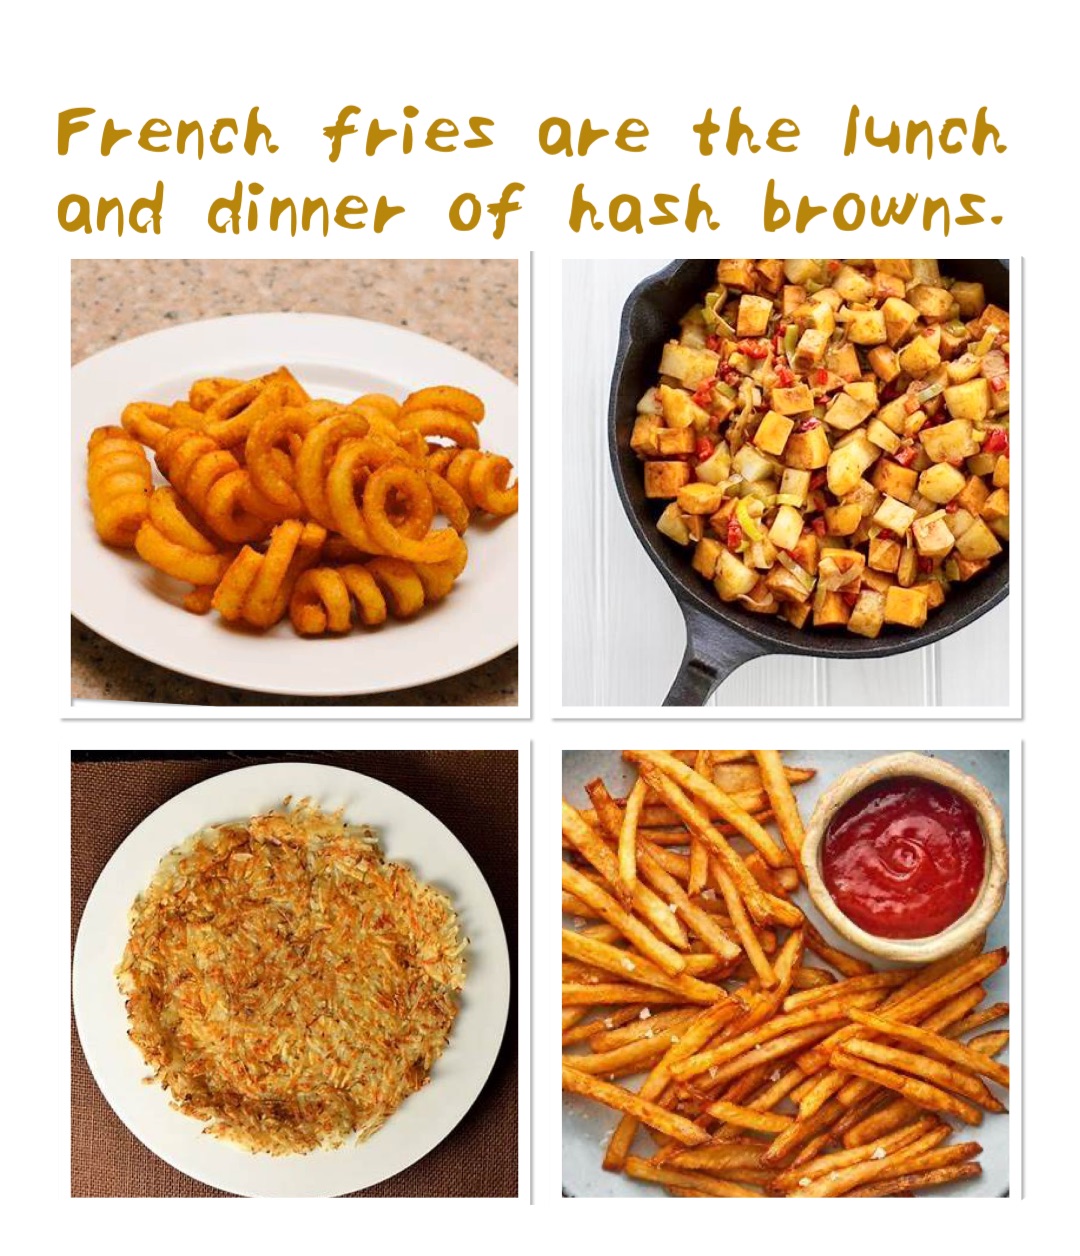 French fries are the lunch and dinner of hash browns.